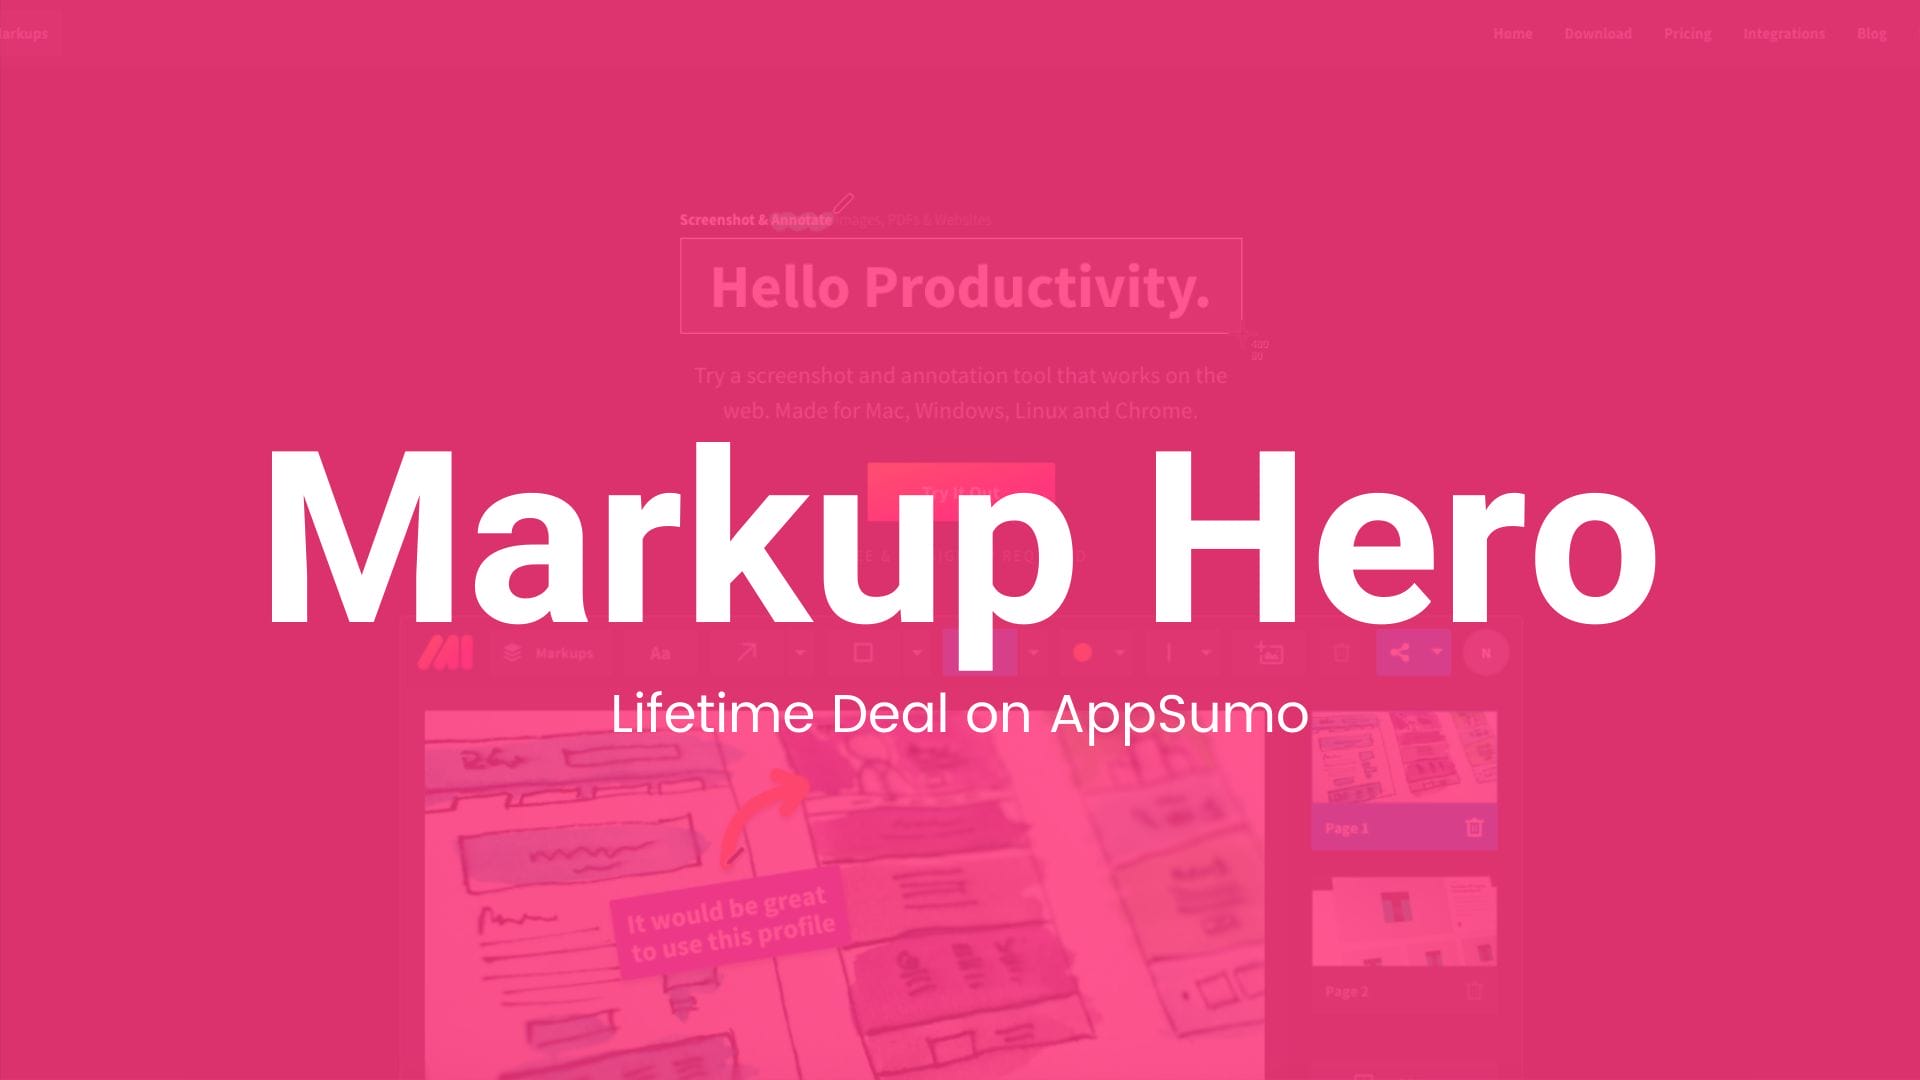 MarkUp Hero: ScreenShot, Annotate, and Edit in One Go